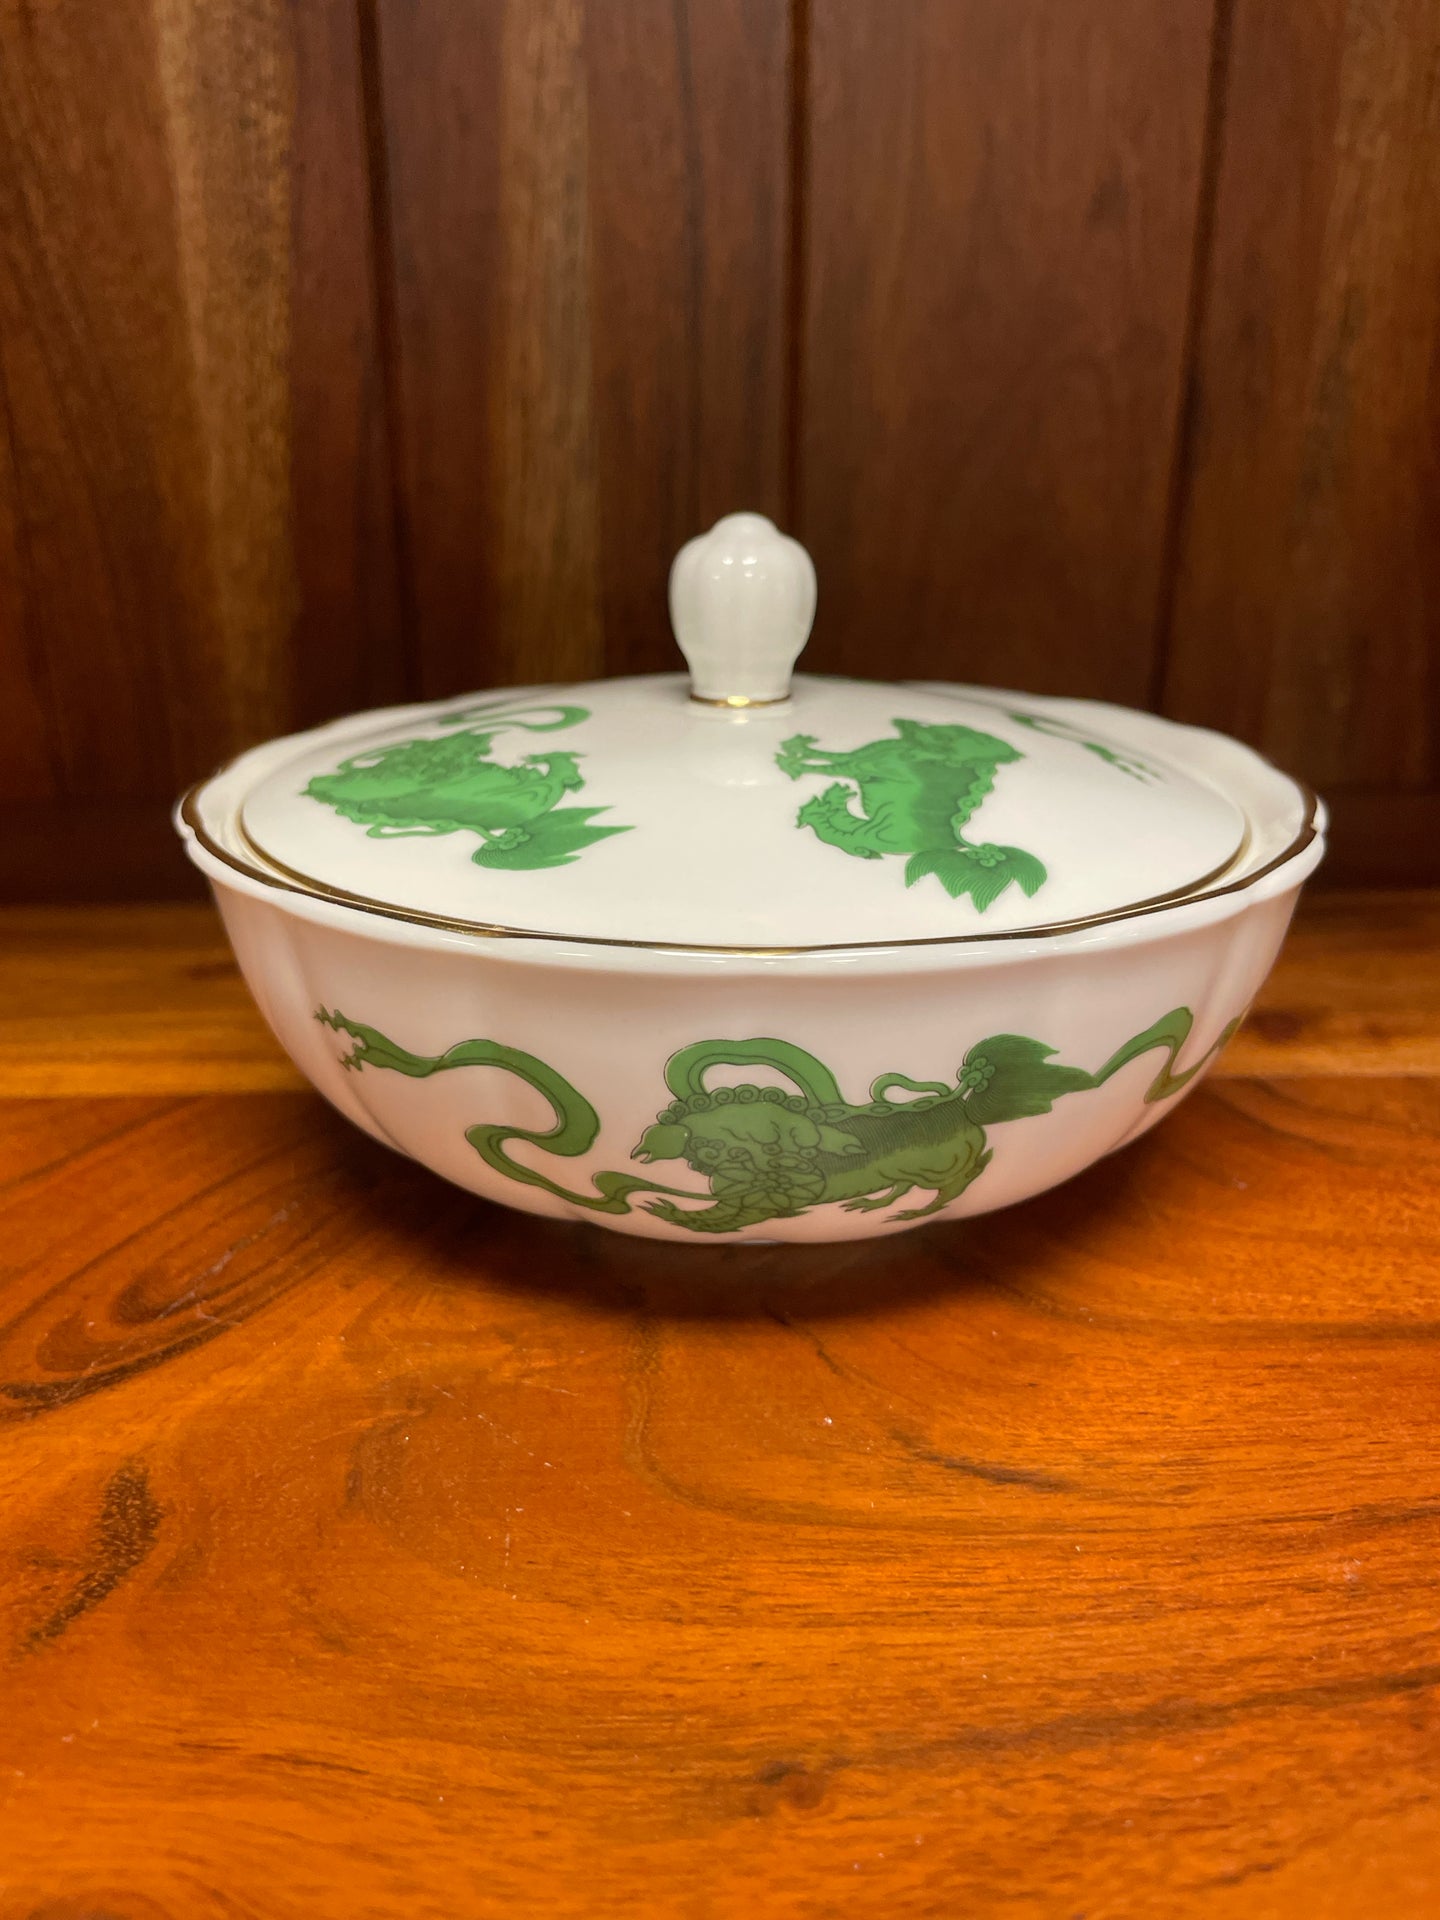 Chinese Tigers Lidded Dish from Wedgewood